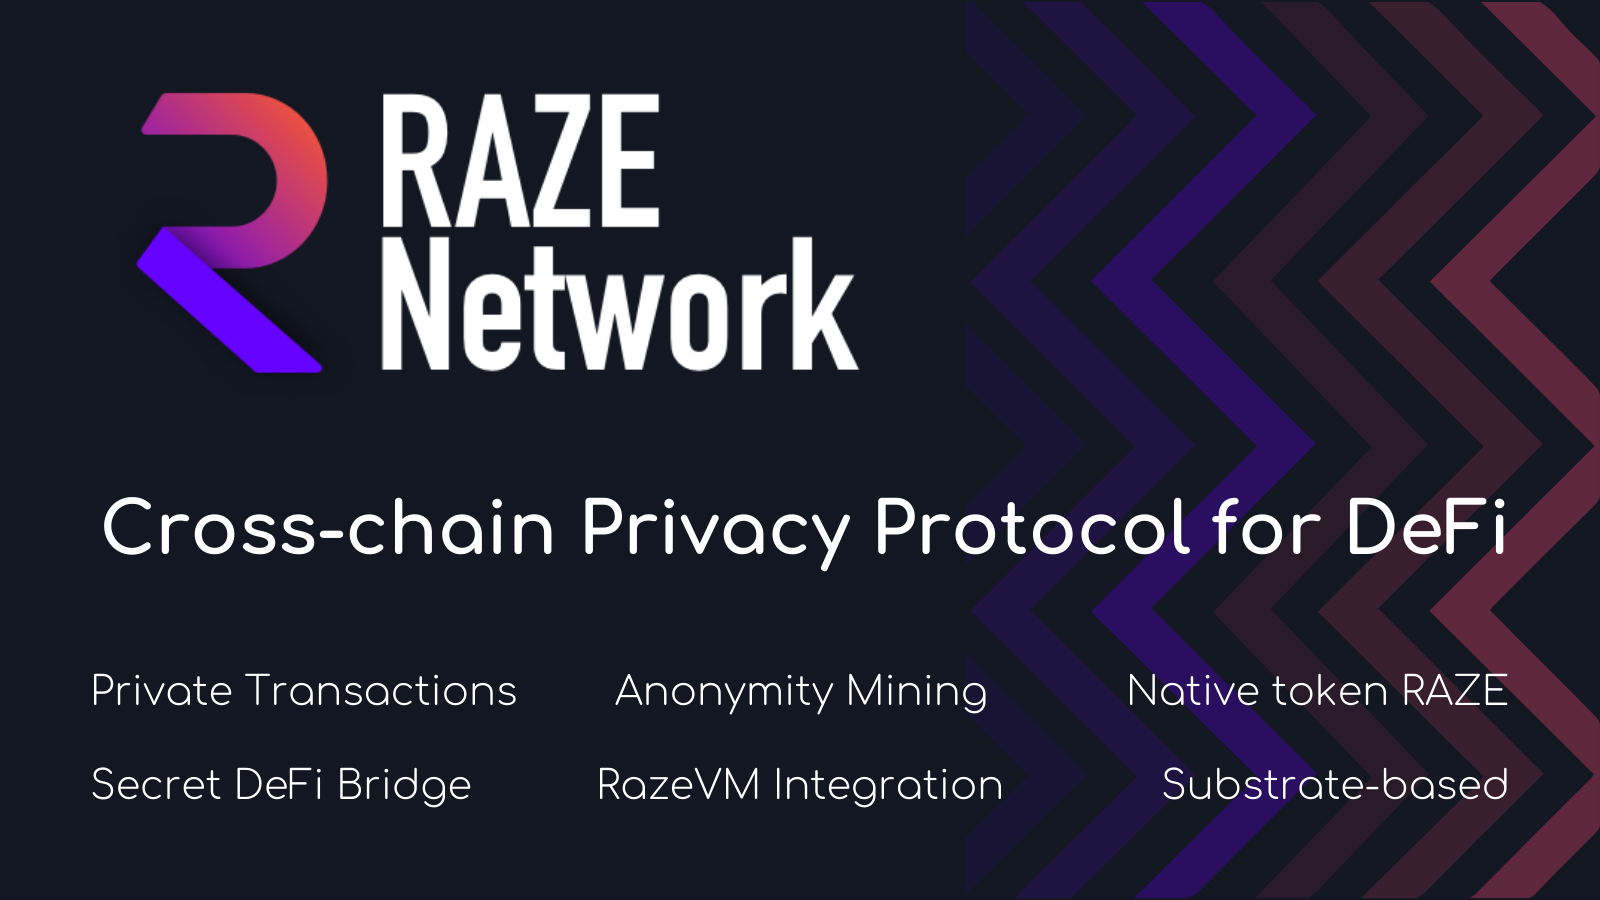 Raze Network Launches Protocol to Enable Confidential Payments for DeFi Users